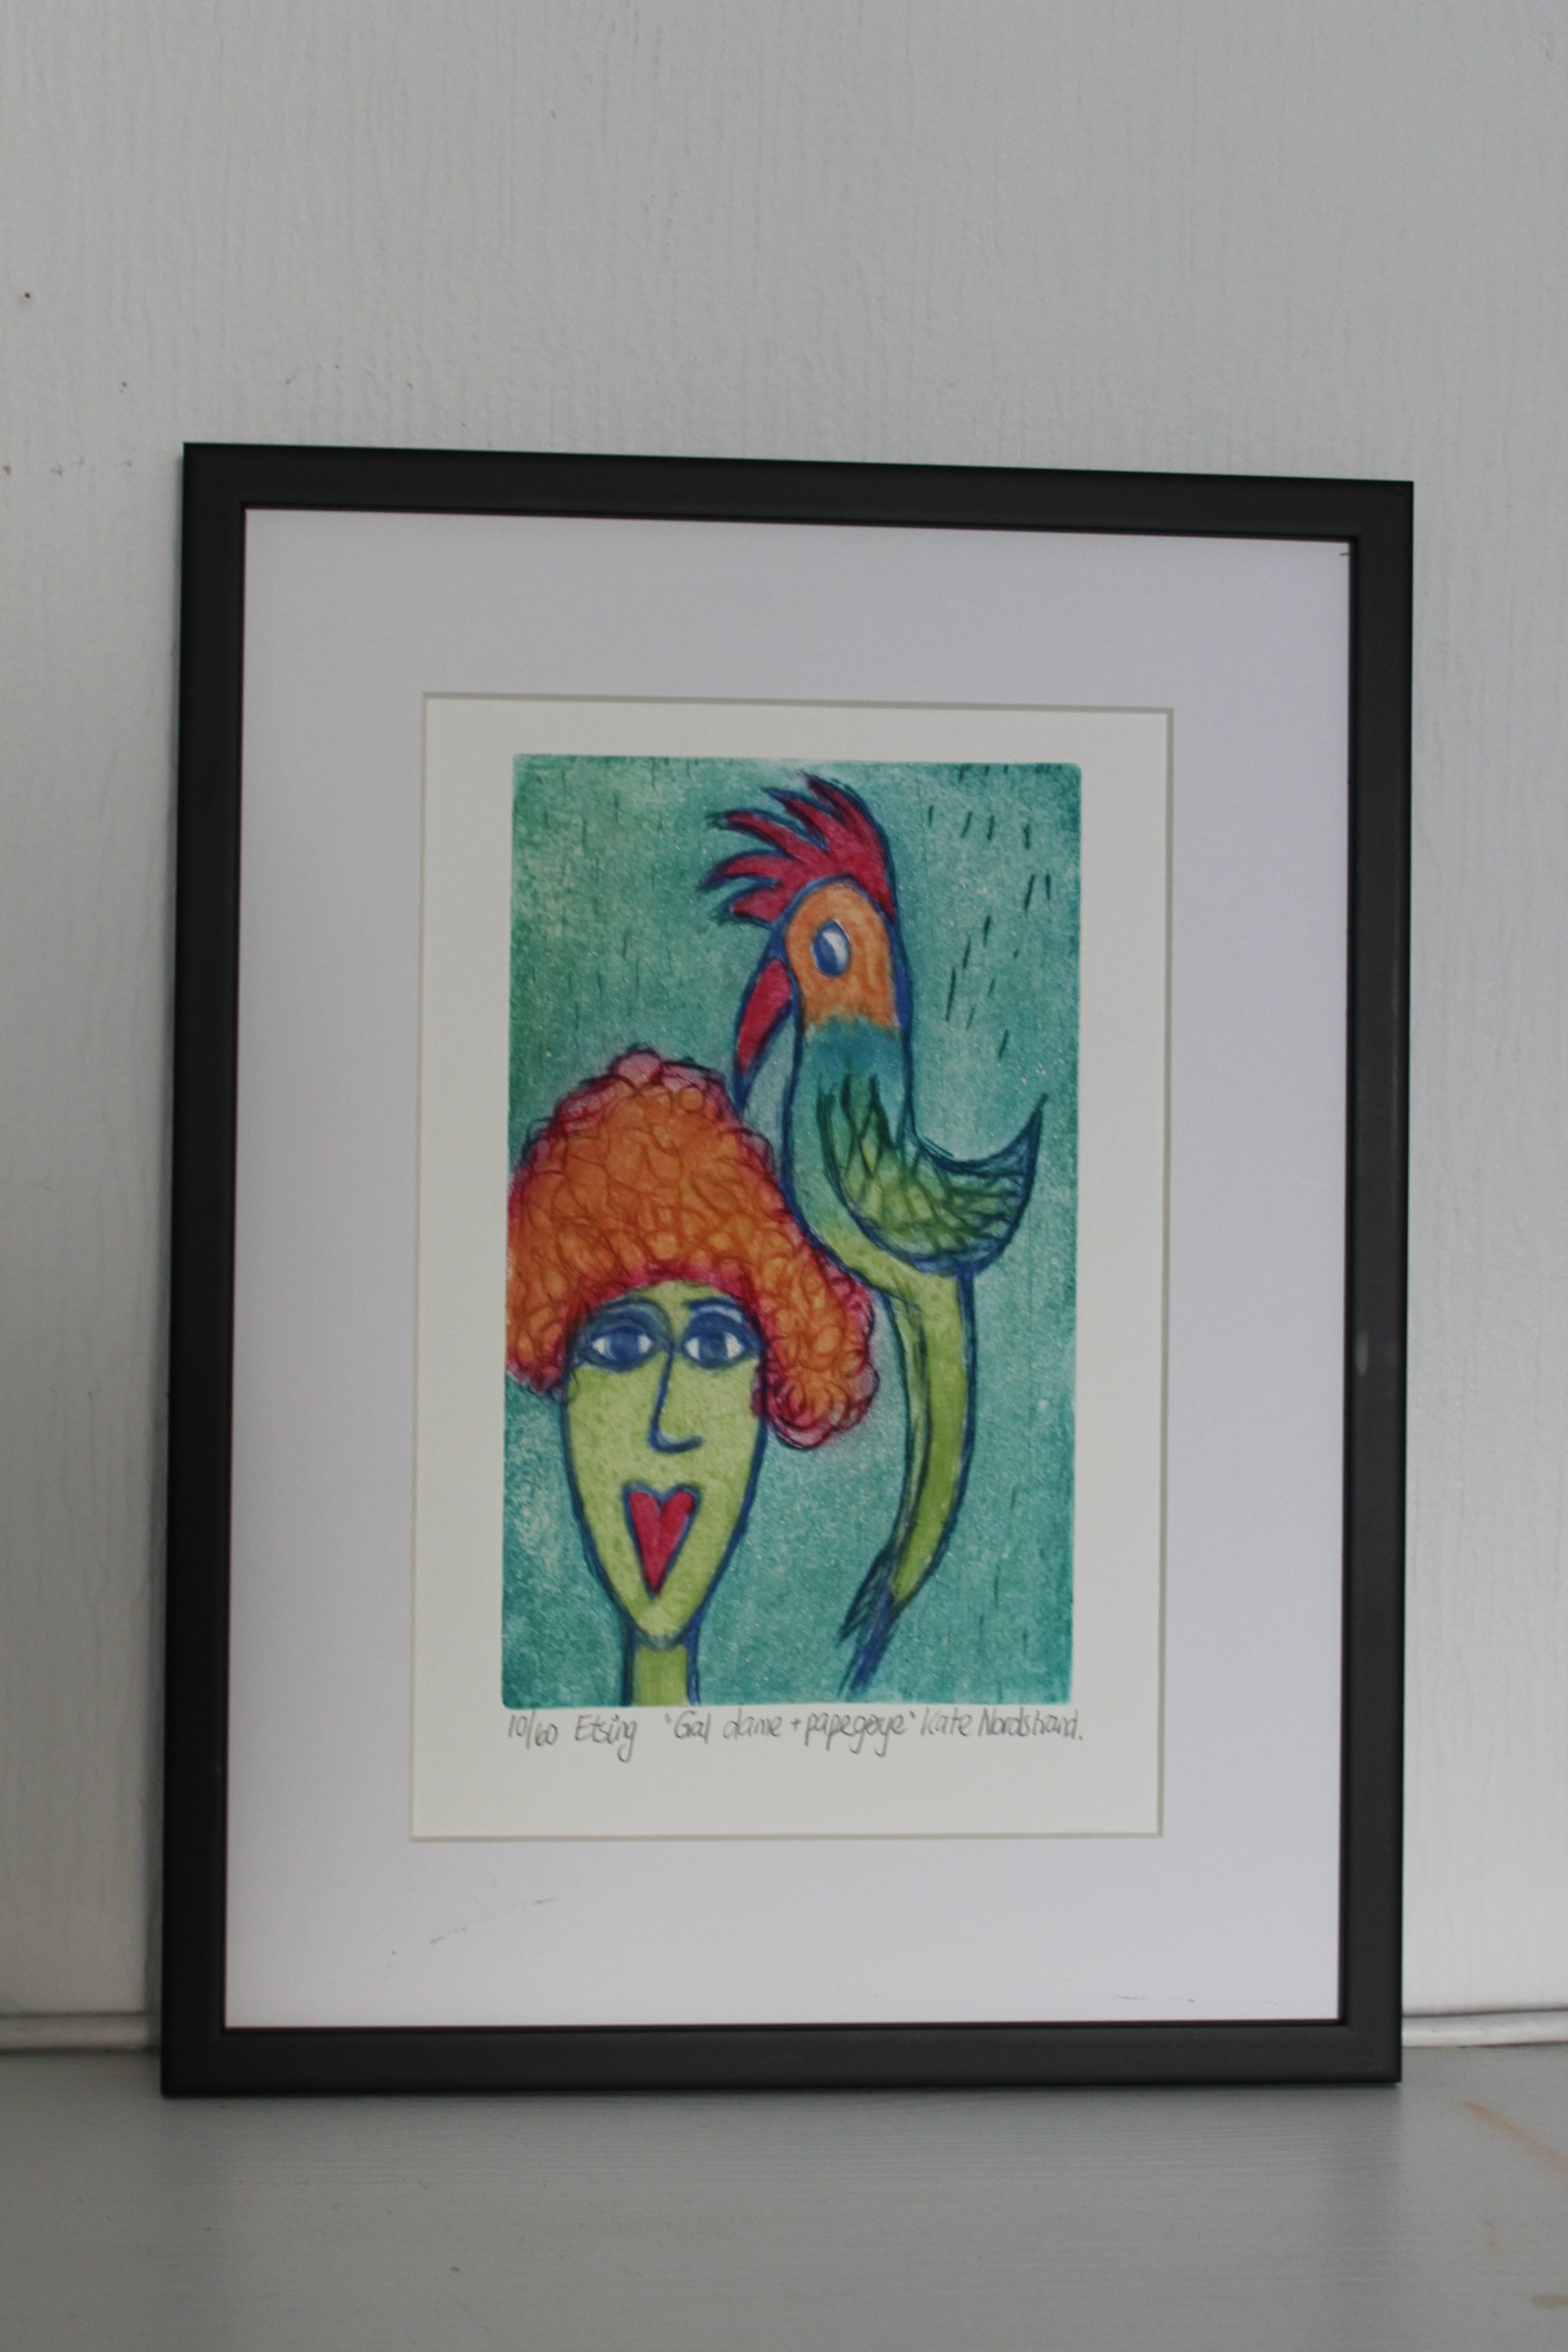 Etching "Crazy Lady + Parrot" 1